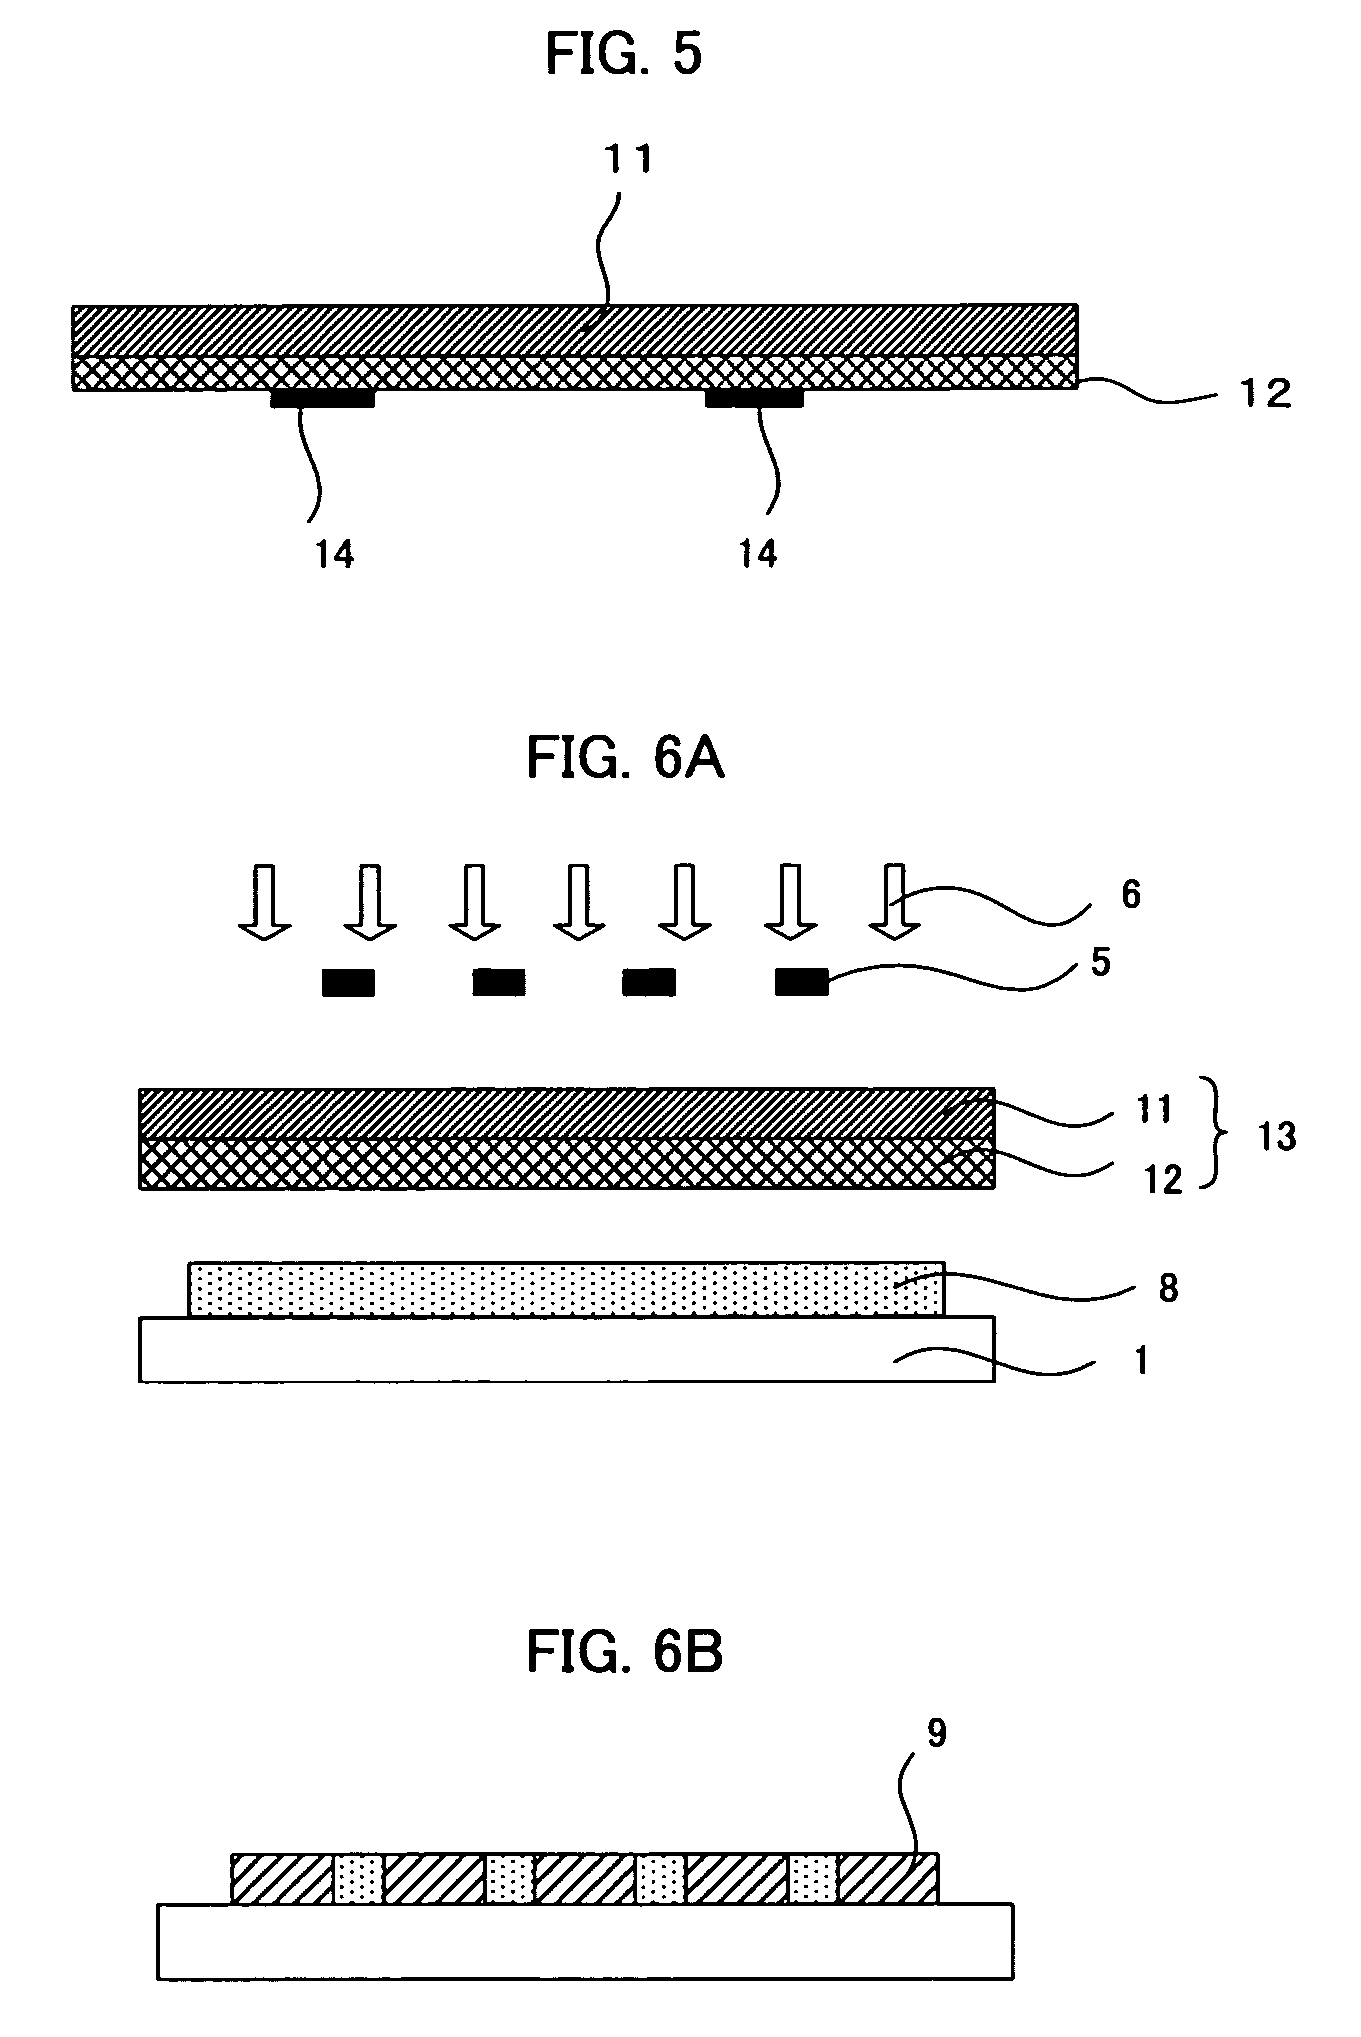 Vascular cell culture patterning substrate